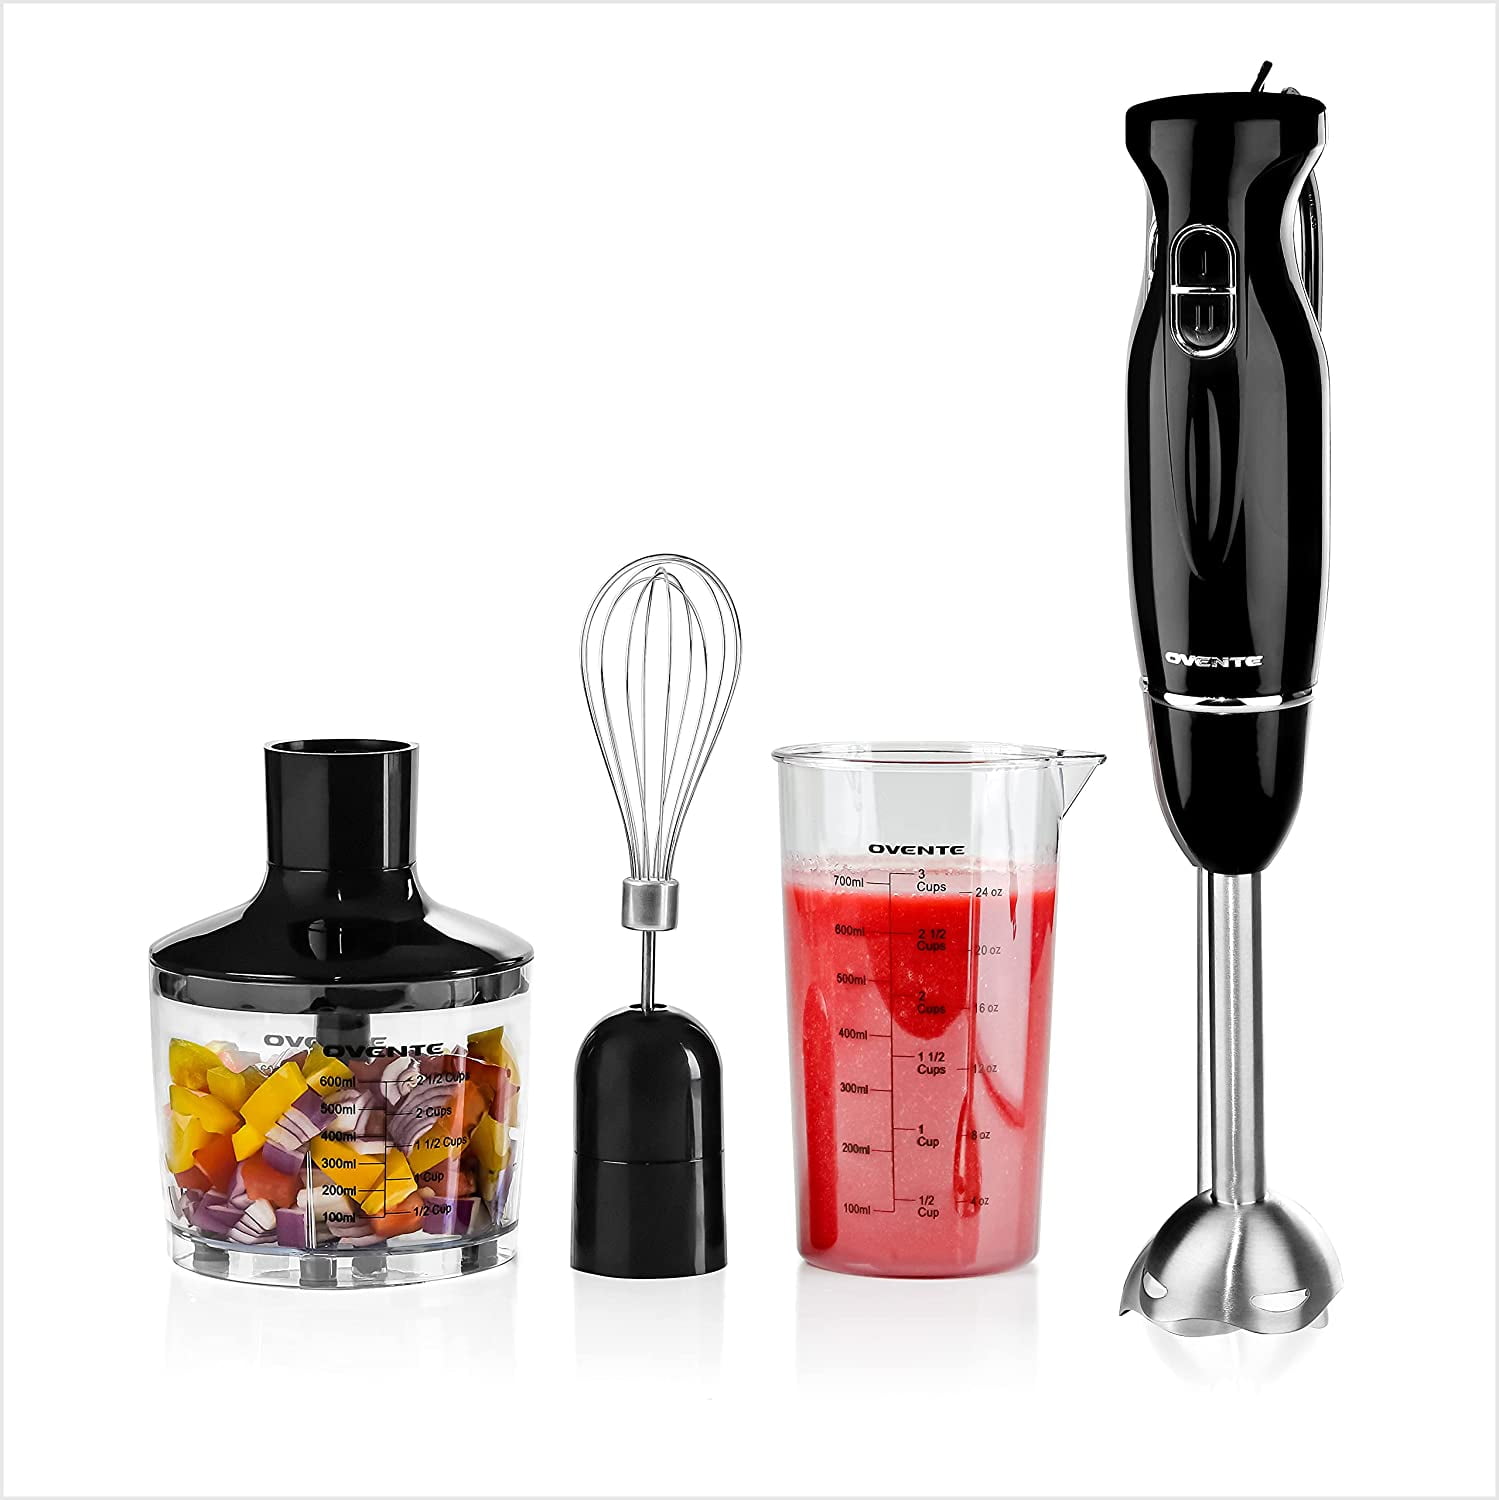 Black Simple One-Touch Power Control Stick Hand Blender Aicok Immersion Blender Detachable Stainless Steel Blade and Whisk 5 Speed Control 